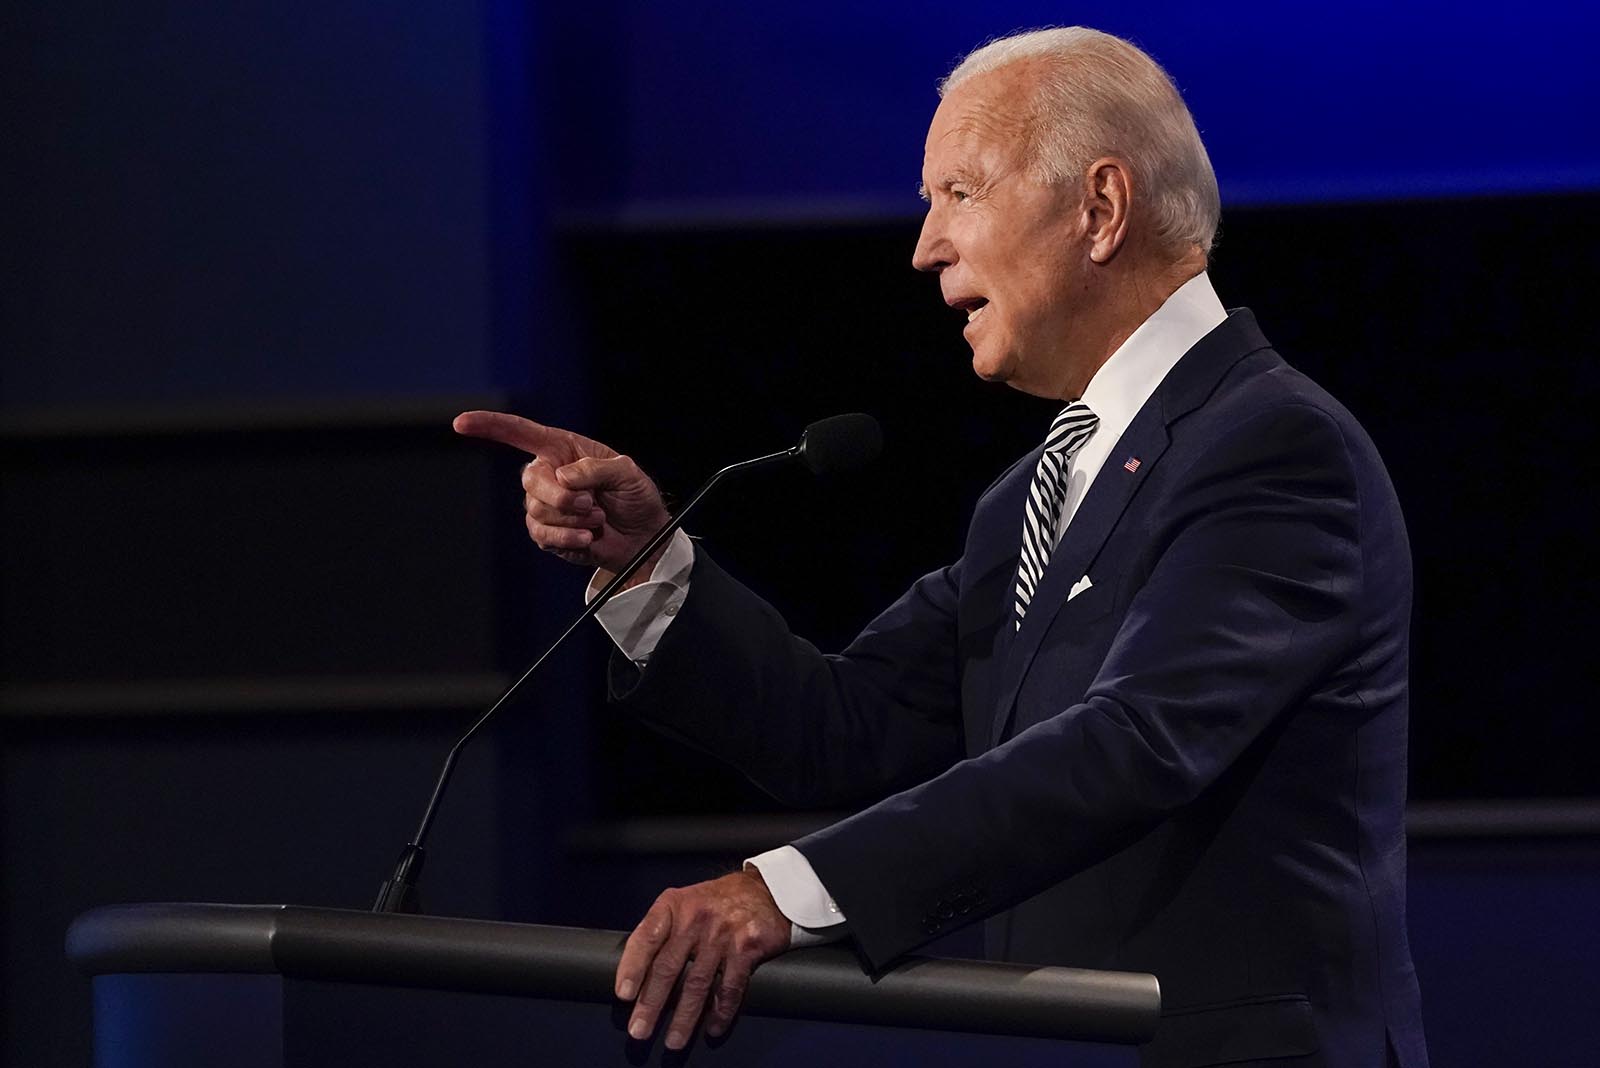 Democratic presidential candidate Joe Biden gestures while speaking during the first presidential debate on Tuesday at Case Western University and Cleveland Clinic, in Cleveland, Ohio.